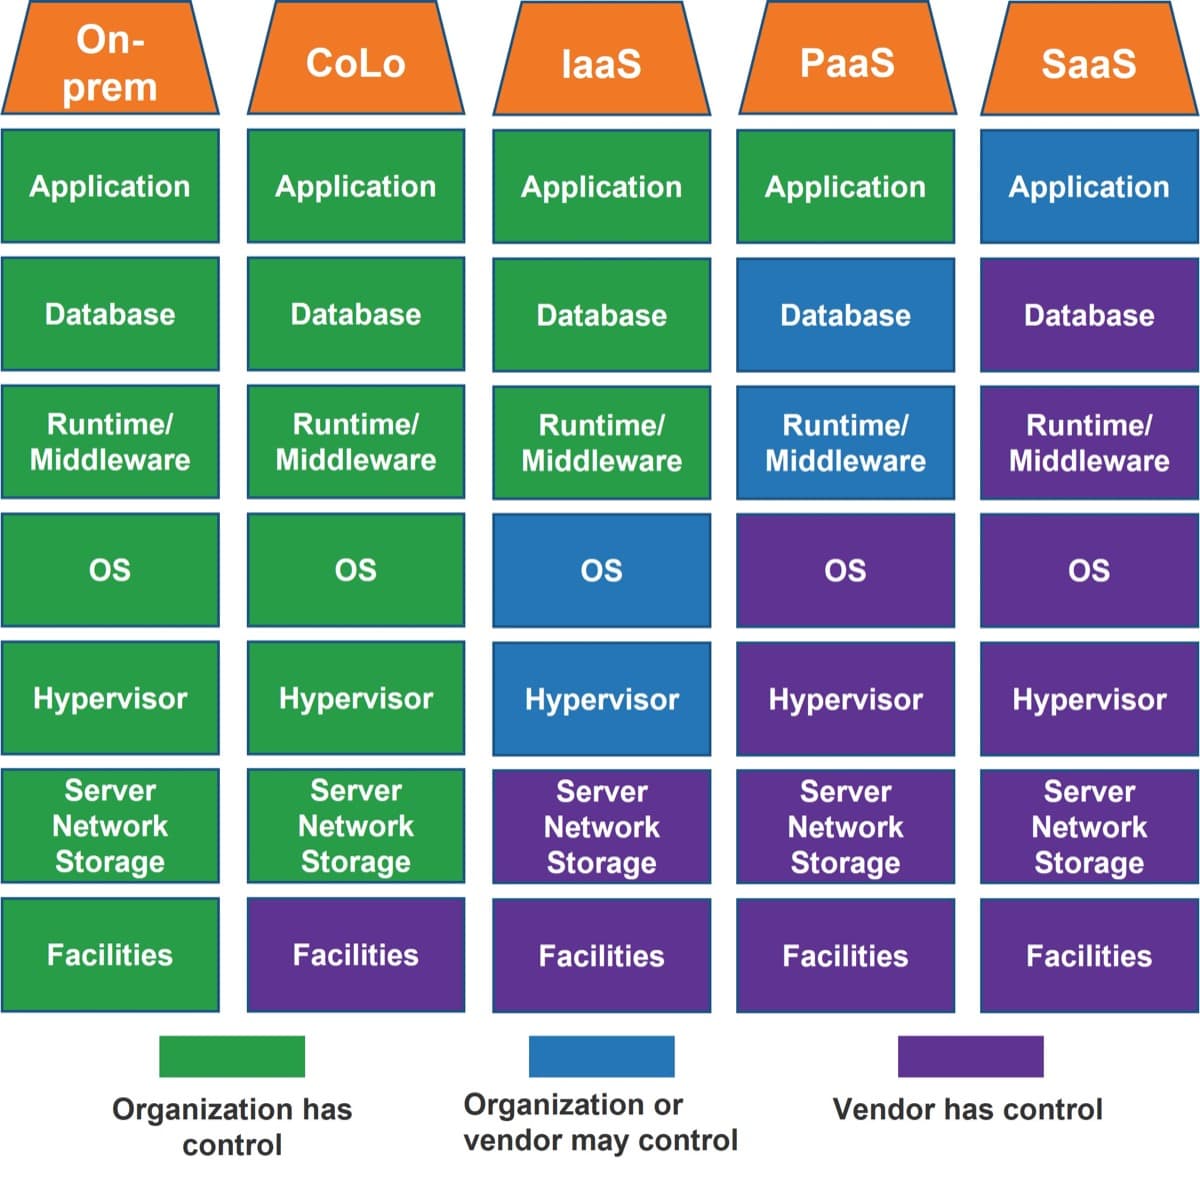 The image contains a screenshot of cloud service models: On-prem, CoLo, laaS, PaaS, and SaaS